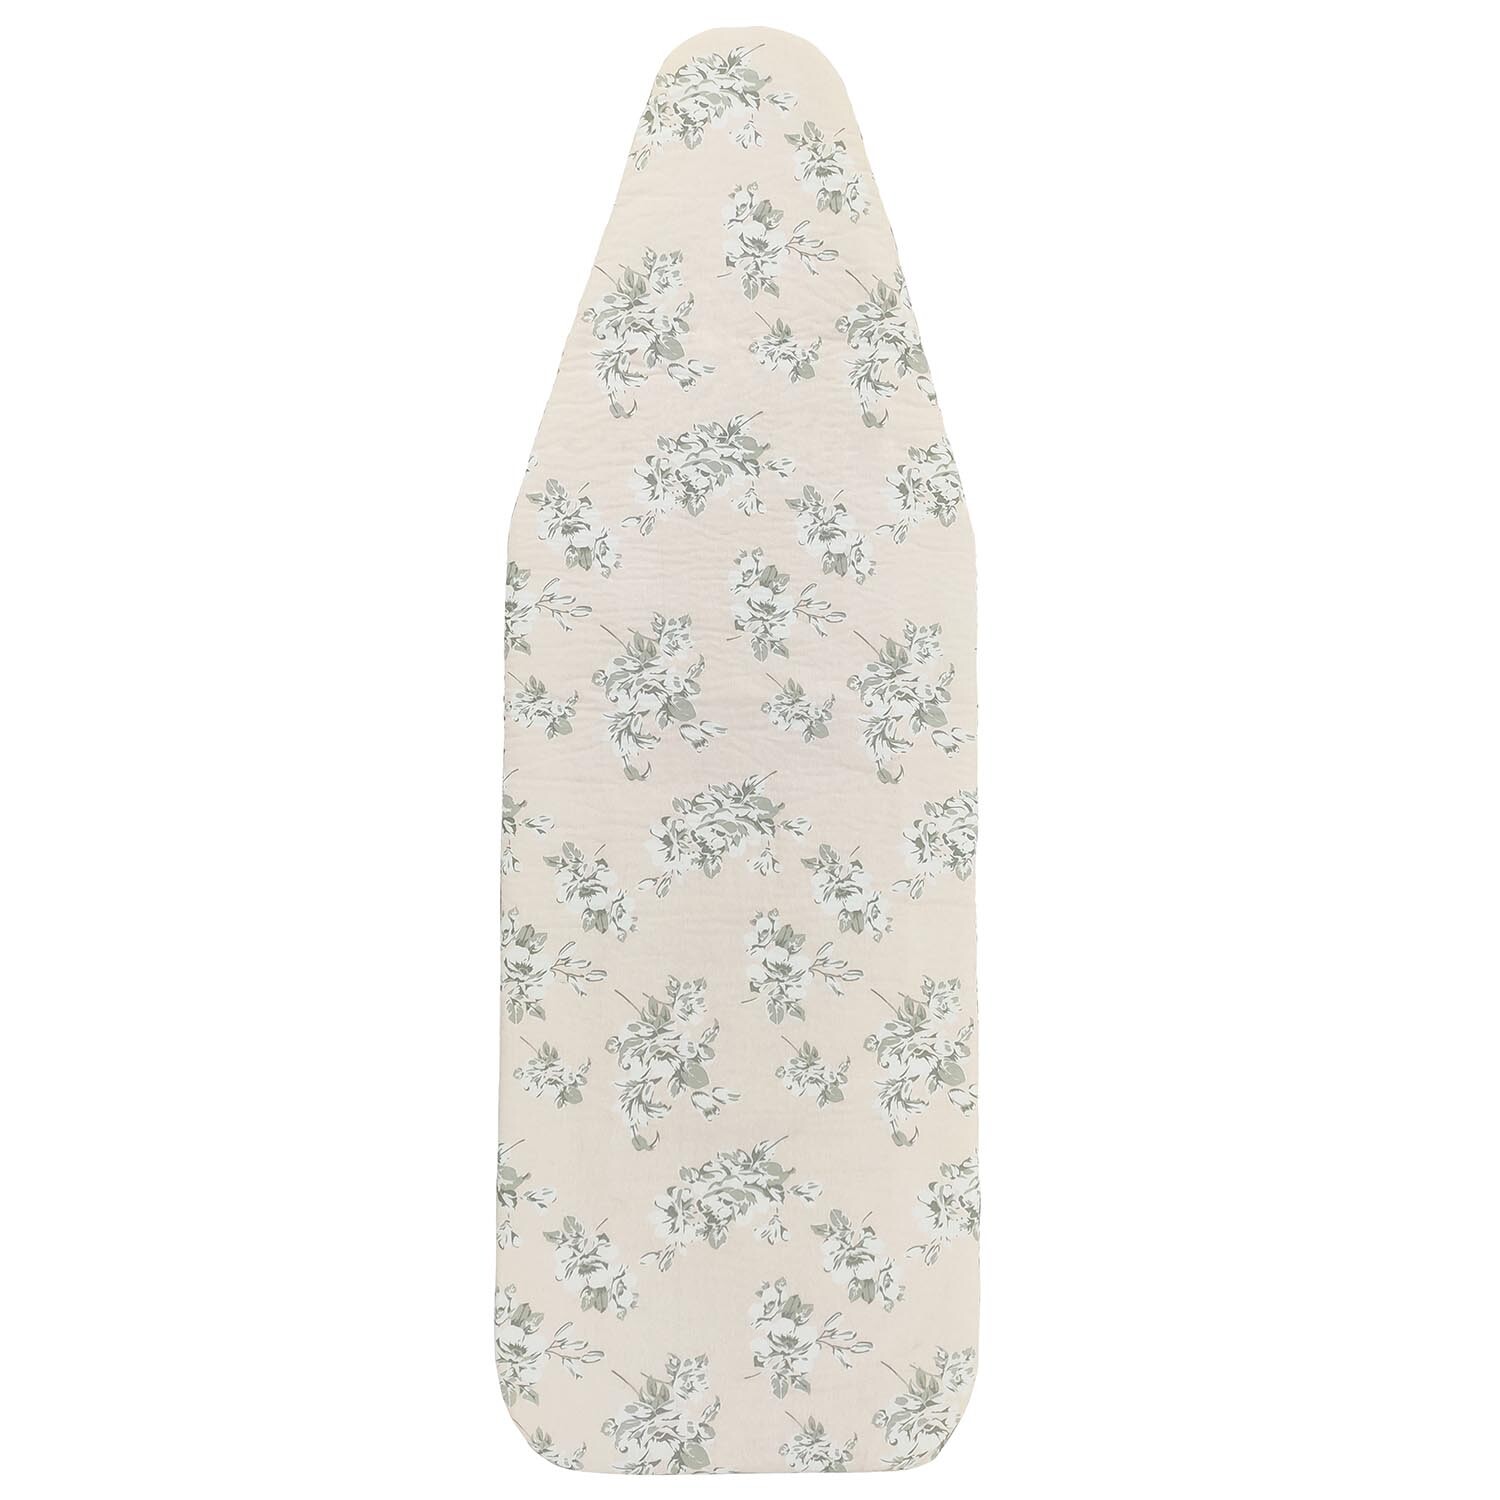 Ironing Board Cover - Small Image 4